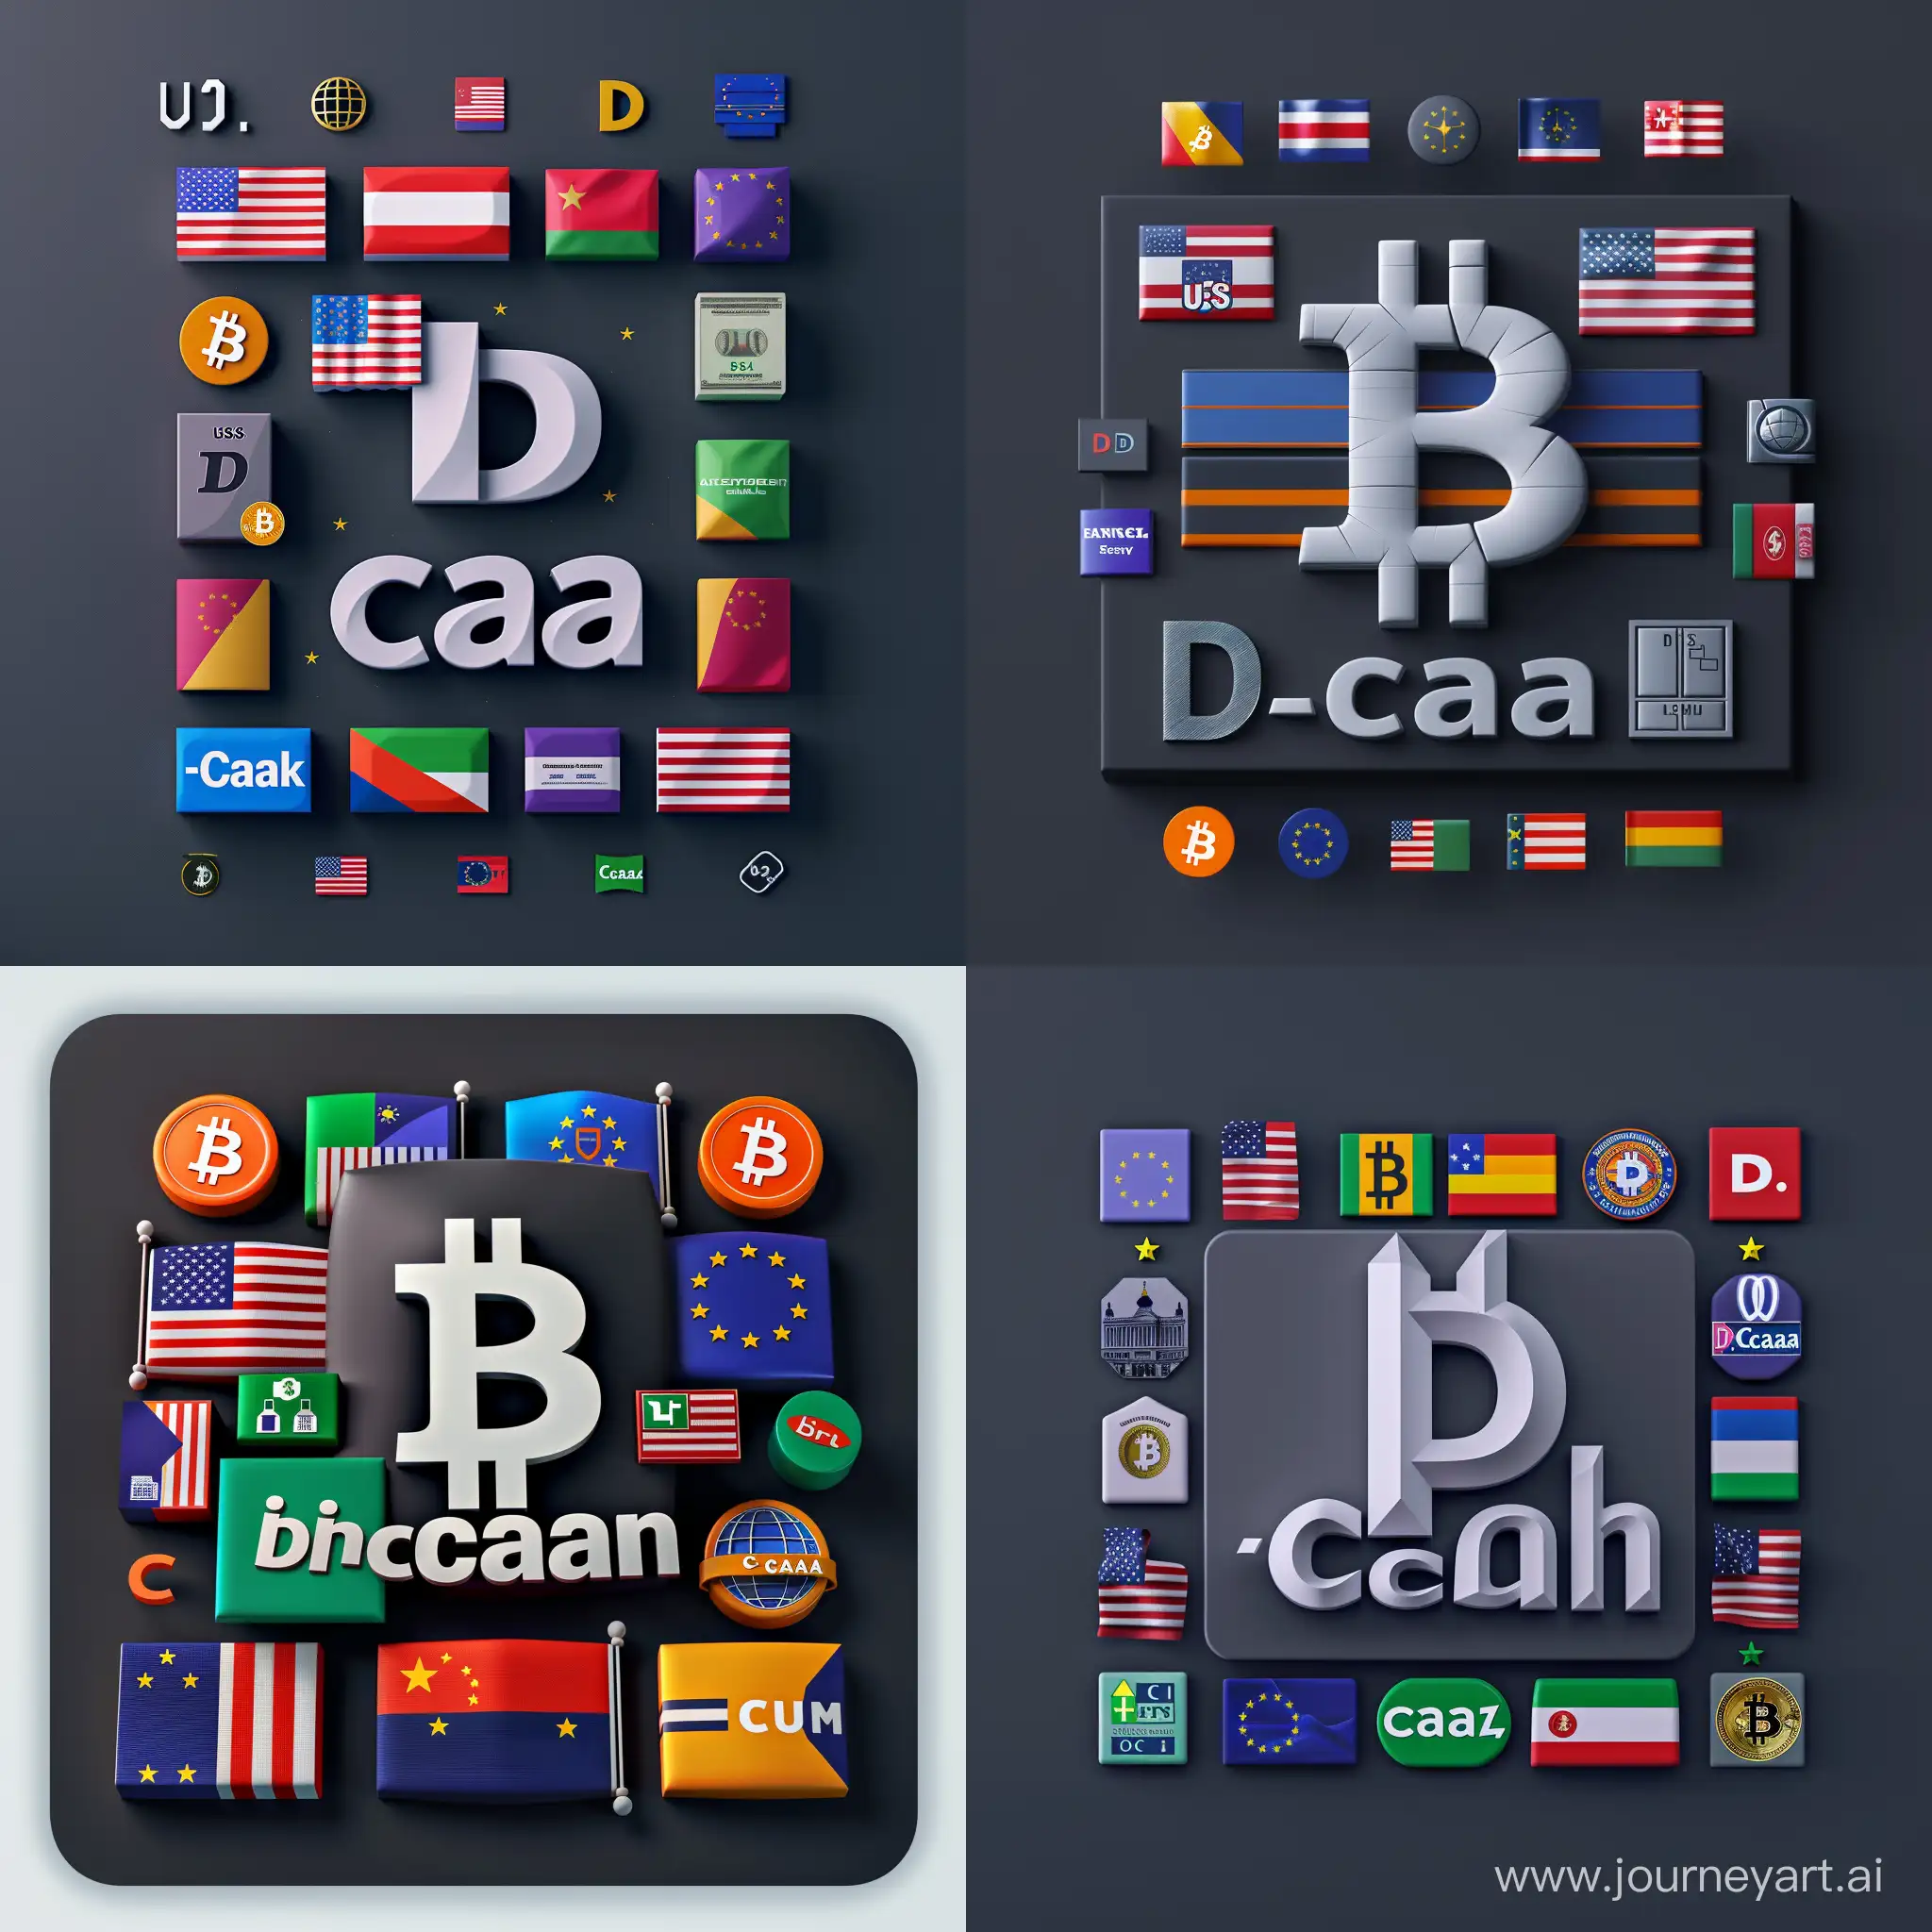 /imagine prompt: A square image featuring a 3D D-Cash logo, inspired by the Bitcoin symbol with two horizontal stripes above and below the letter "D". "Cash" in volumetric text in front, surrounded by American and European banking system elements, including major bank logos and banking service icons. Flags of the USA and EU subtly integrated, set against a dark background. Modern, clean, professional style, bright bank logos for contrast. Created Using: 3D modeling, digital illustration, graphic design, bright color contrasts, shadow and light play, high-resolution rendering, modern typography, professional branding, hd quality, natural look --ar 1:1 --v 6.0